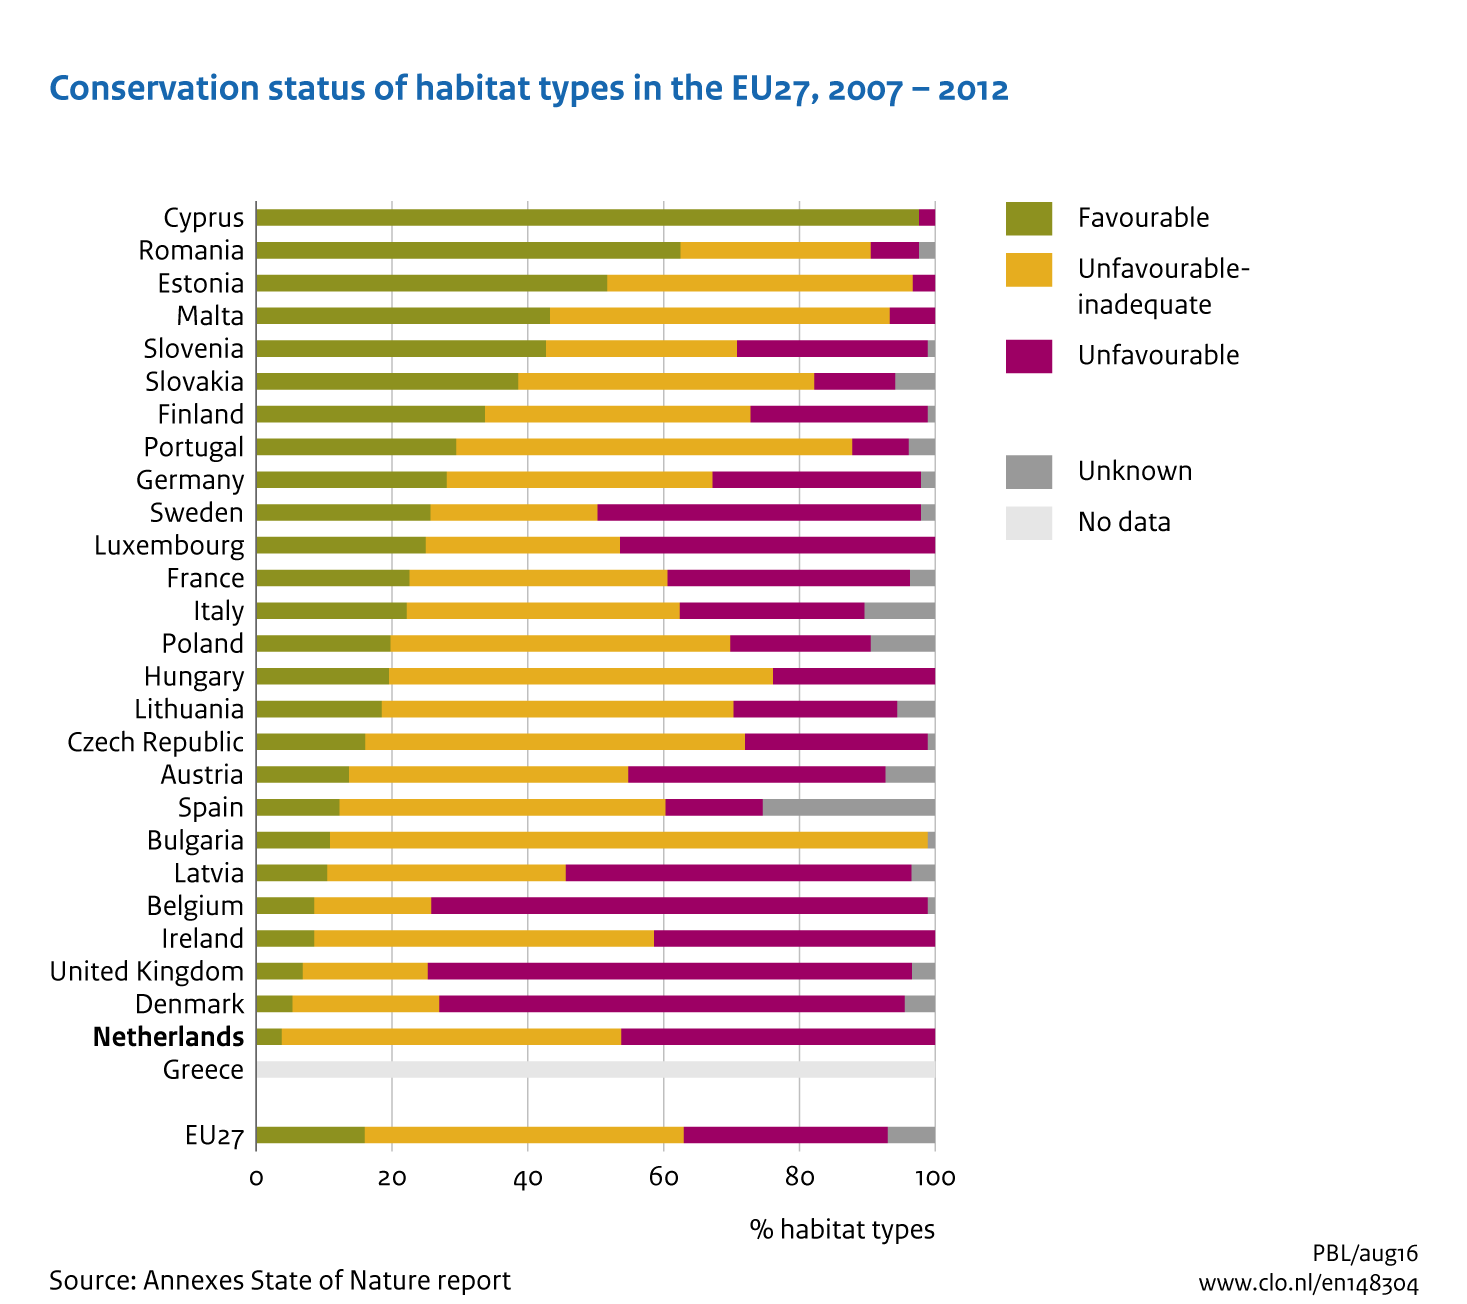 Image Conservation status of habitat types in EU27. The image is further explained in the text.